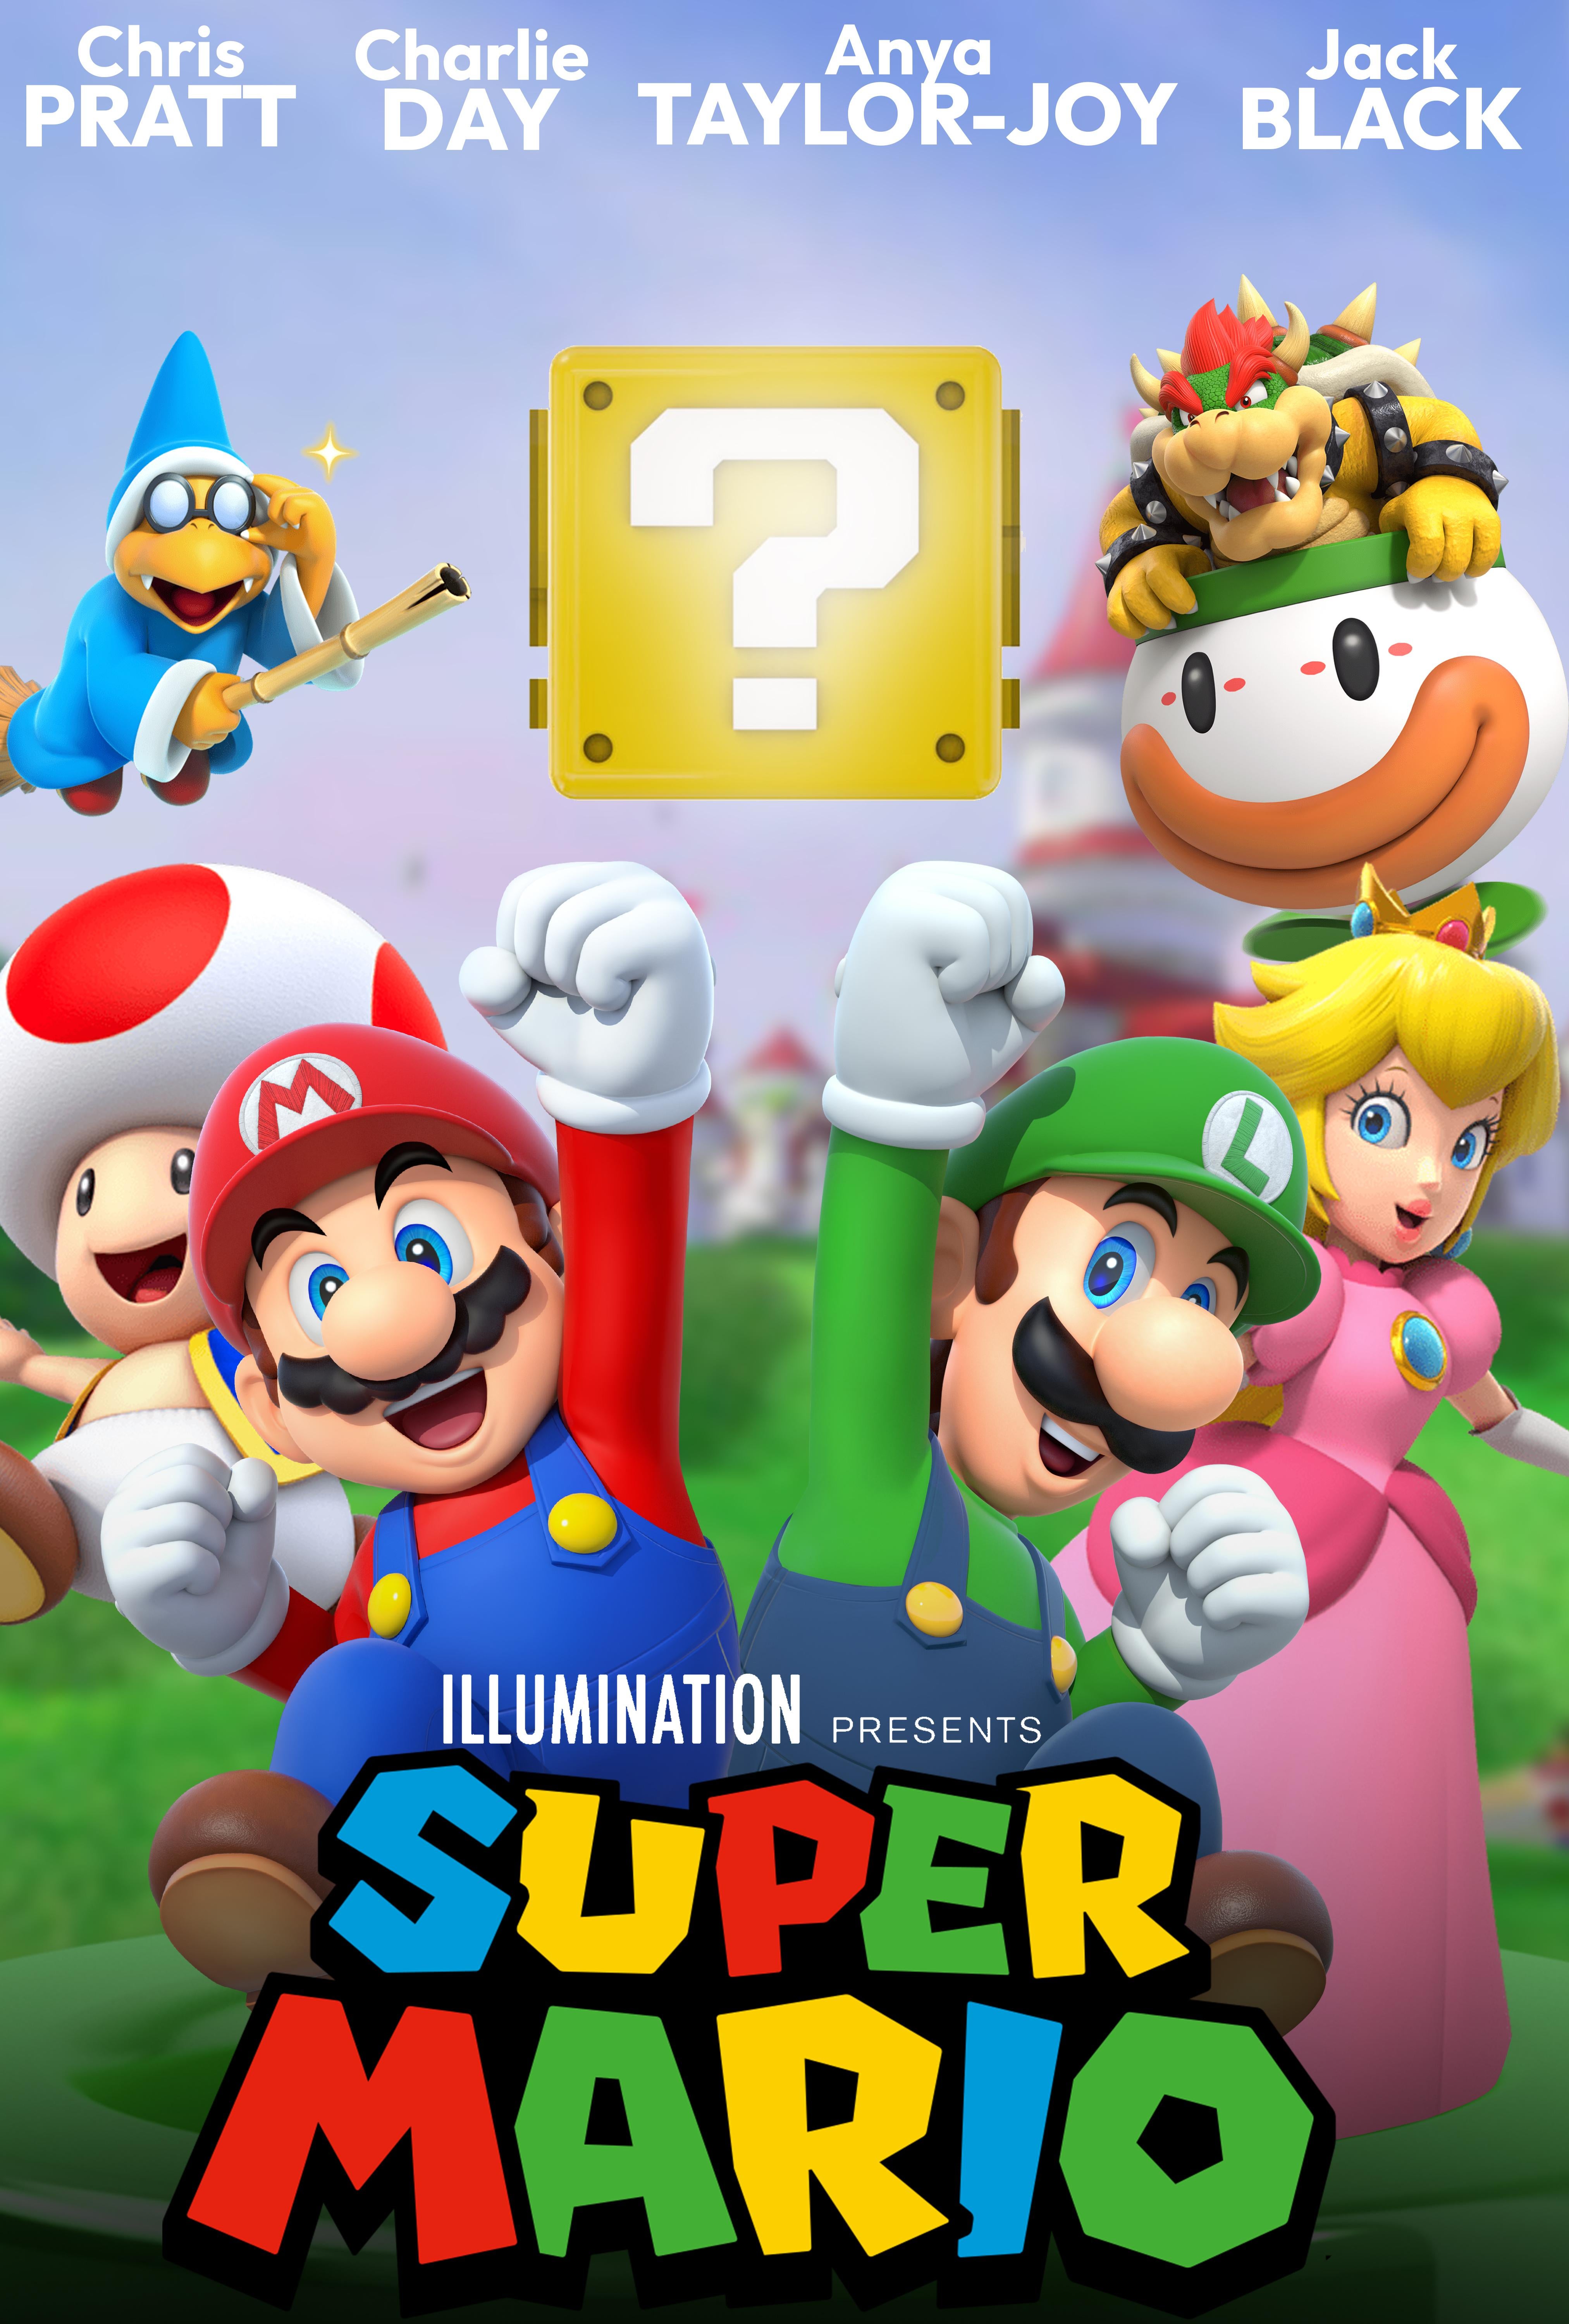 decided to make a mock up poster for the mario movie. definitely not a pro photohop artist by any means but i think it looks pretty alright. could always look worse lmaoo